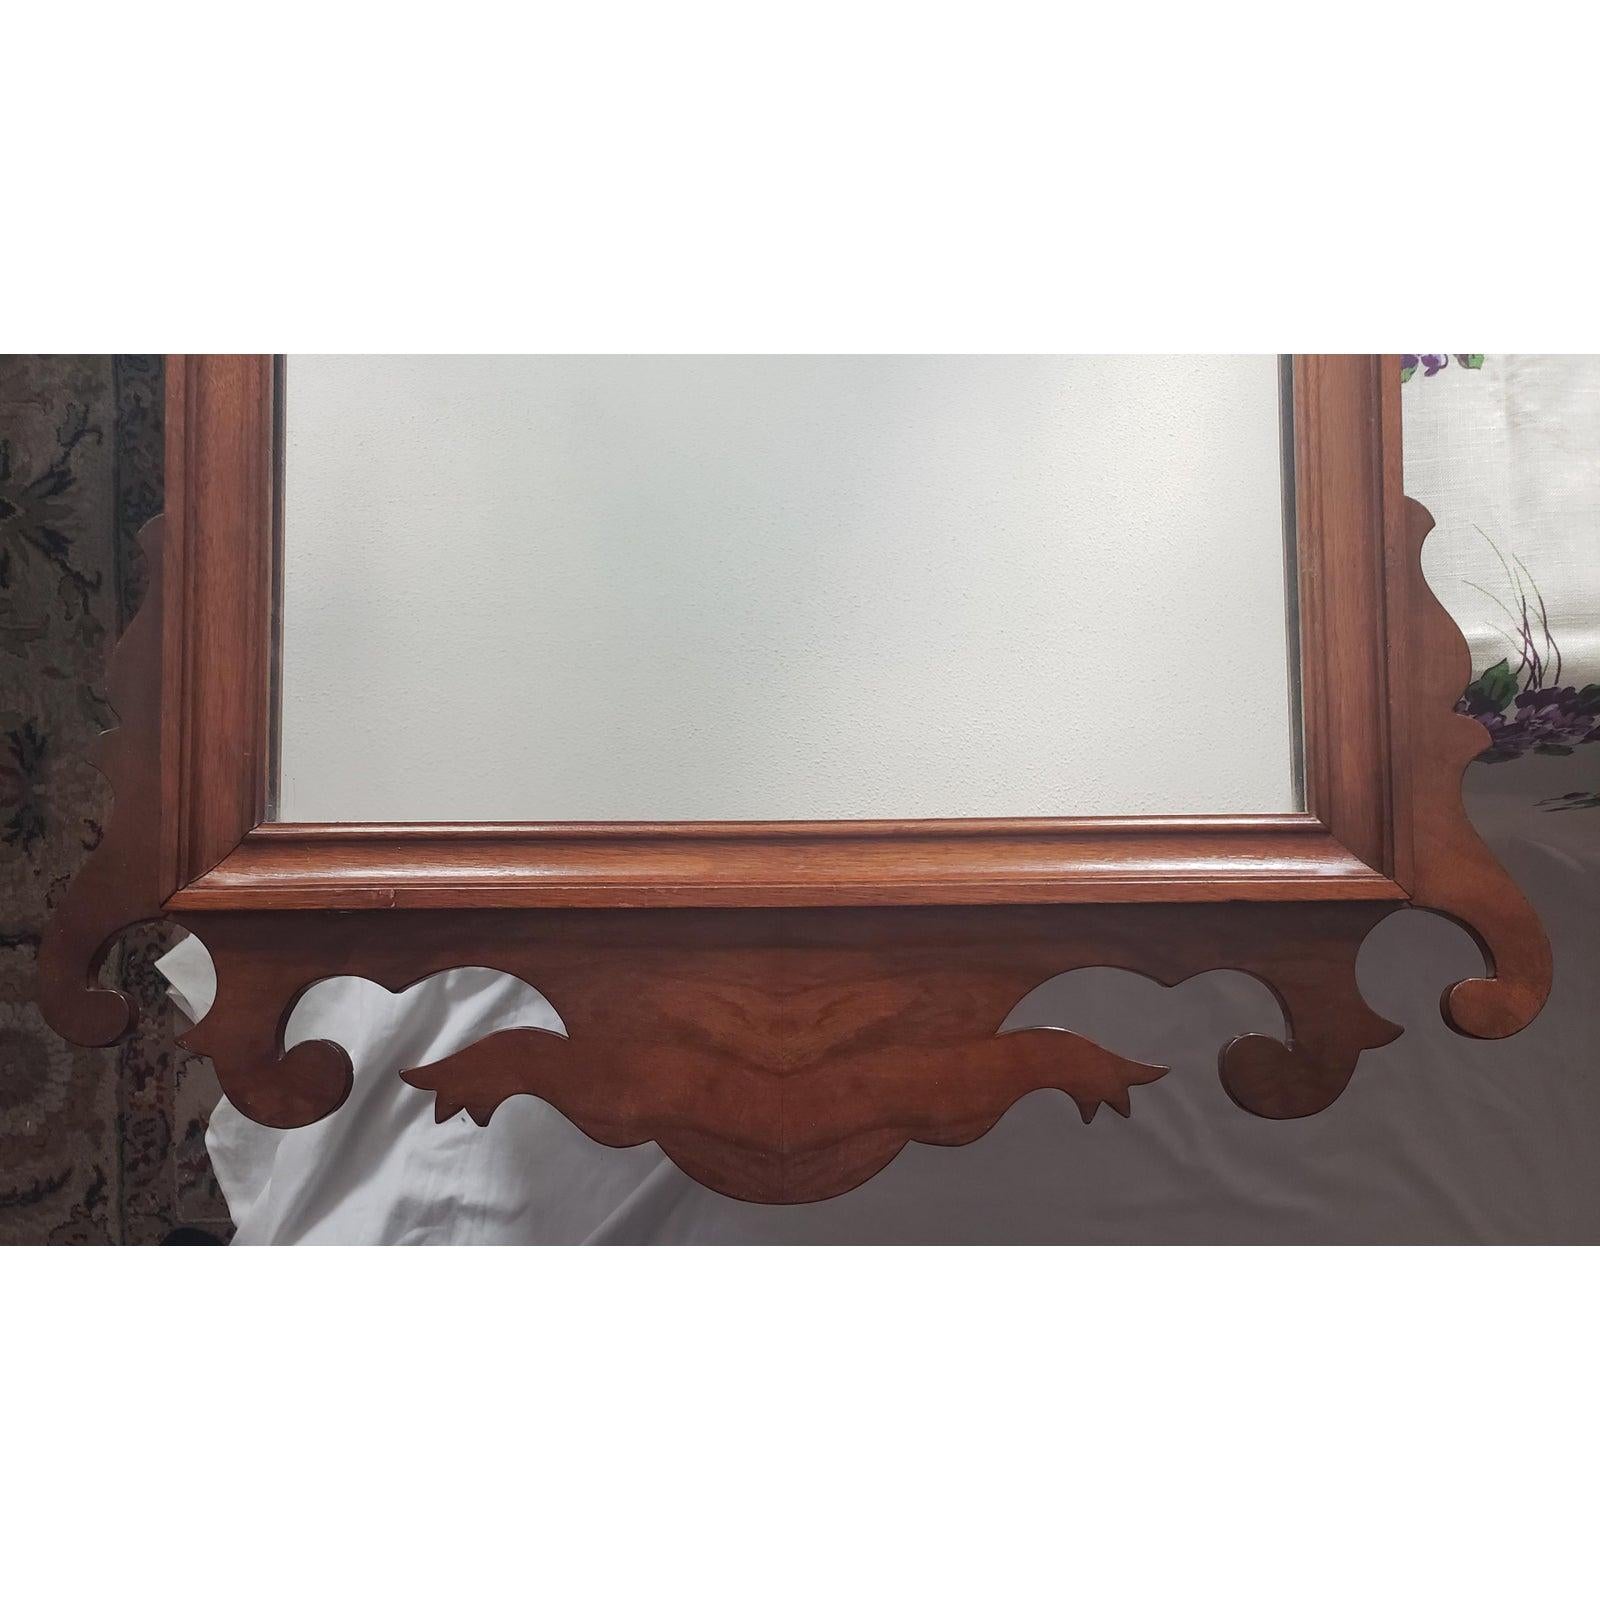 Canadian Antique 1900s Solid Mahogany Chippendale Mirror For Sale